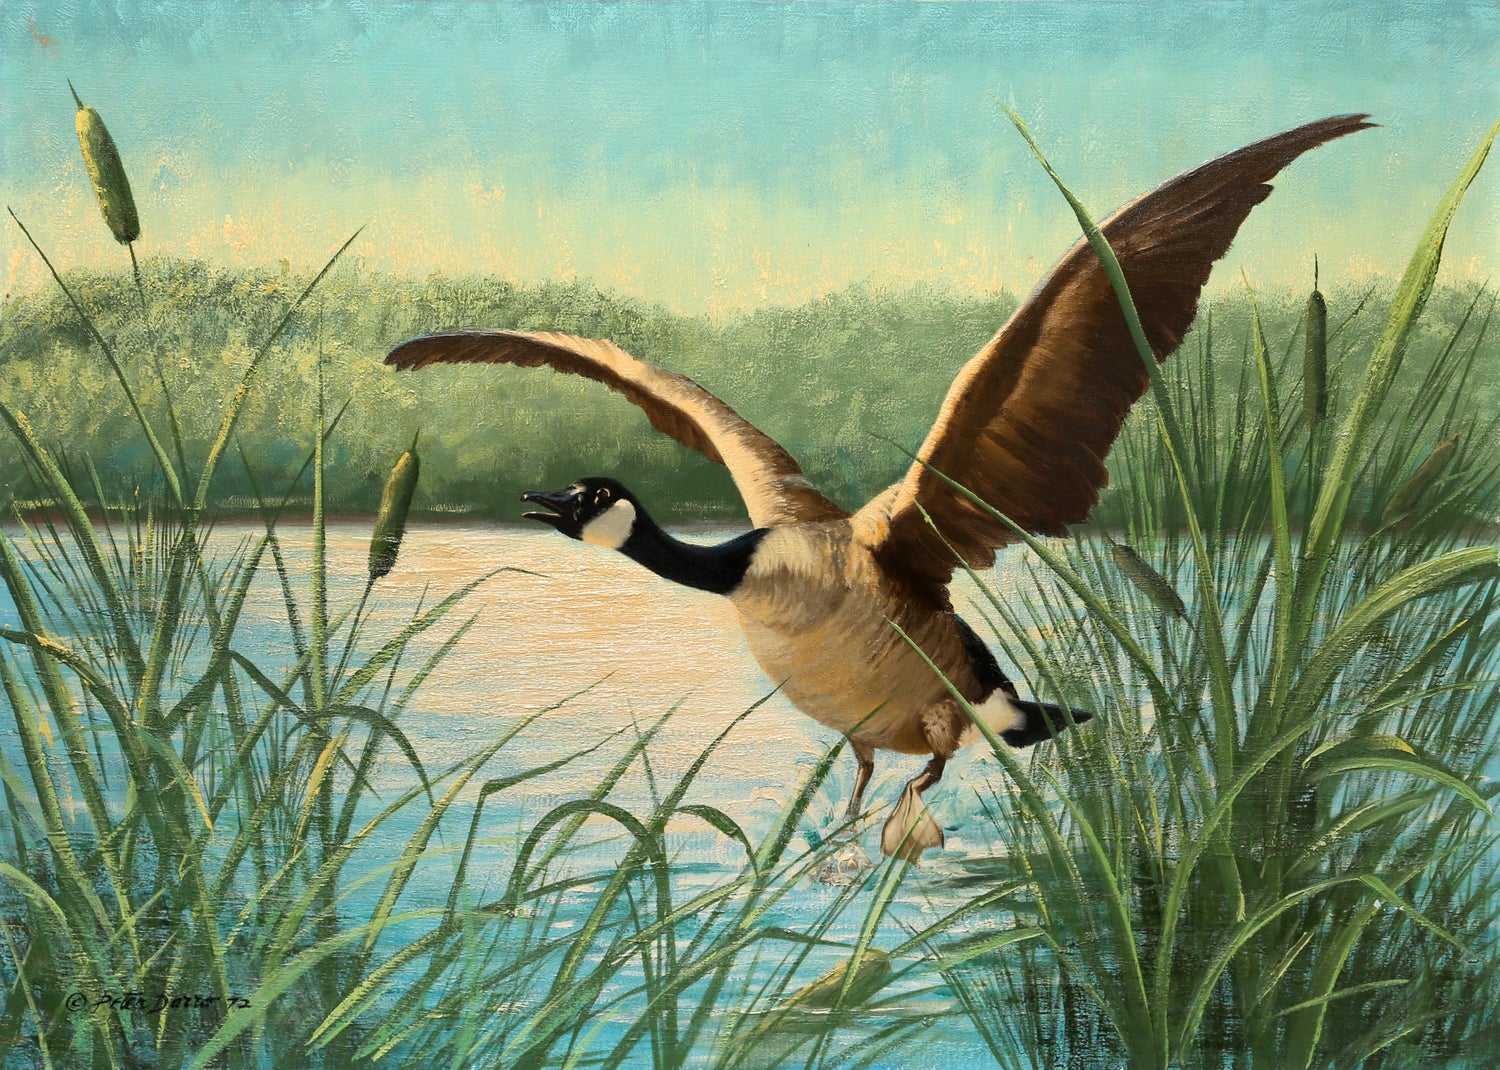 Oil painting on a Canada goose feather - Yue Zeng Art Studio